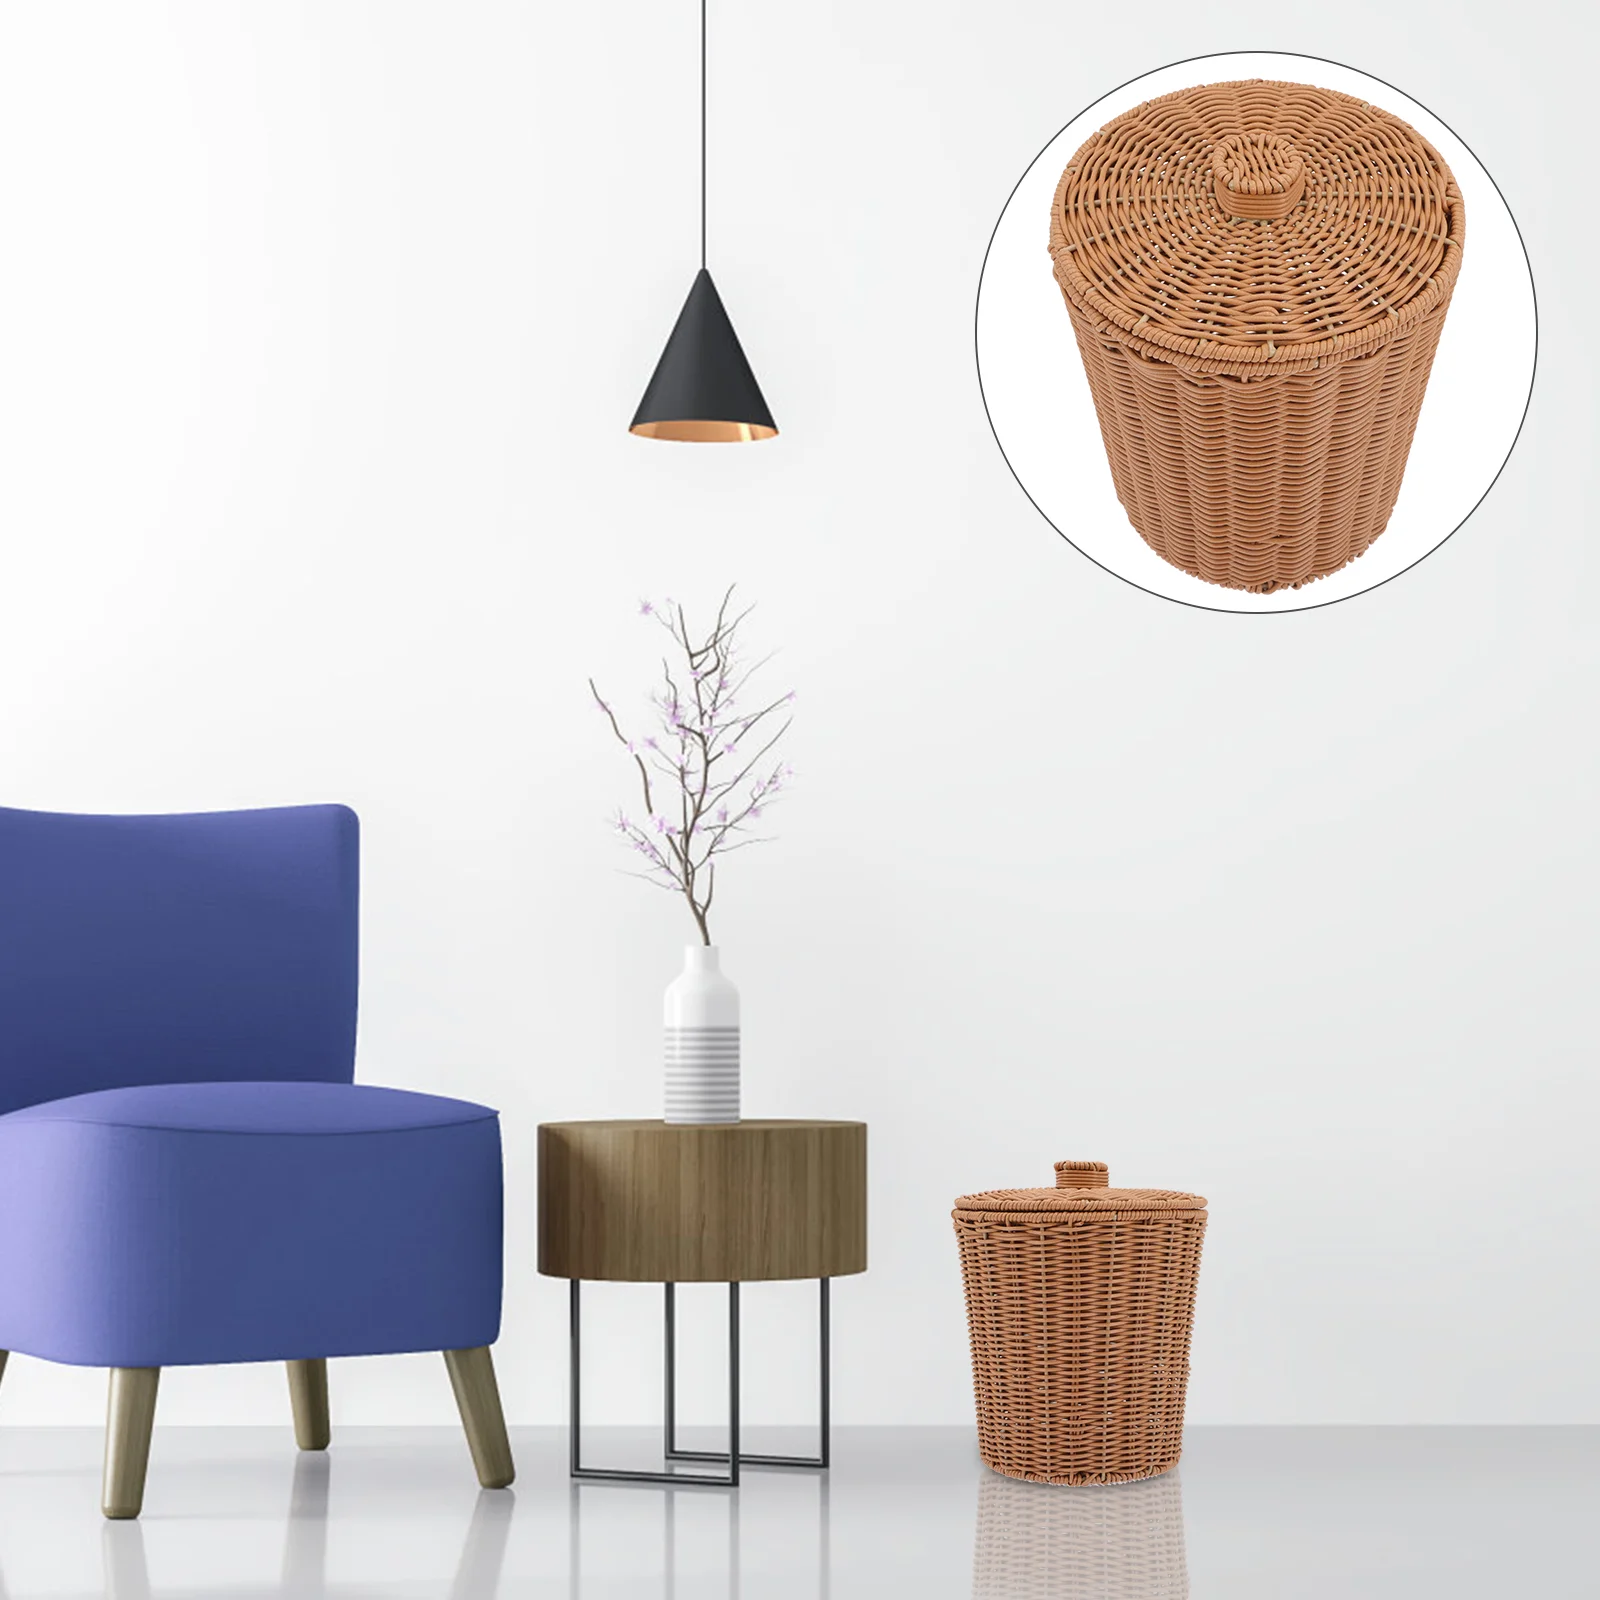 

Basket Trash Storage Can Waste Woven Rattan Wicker Bin Laundry Lid Garbage Baskets Container Hamper Round Rubbish Clothes Office